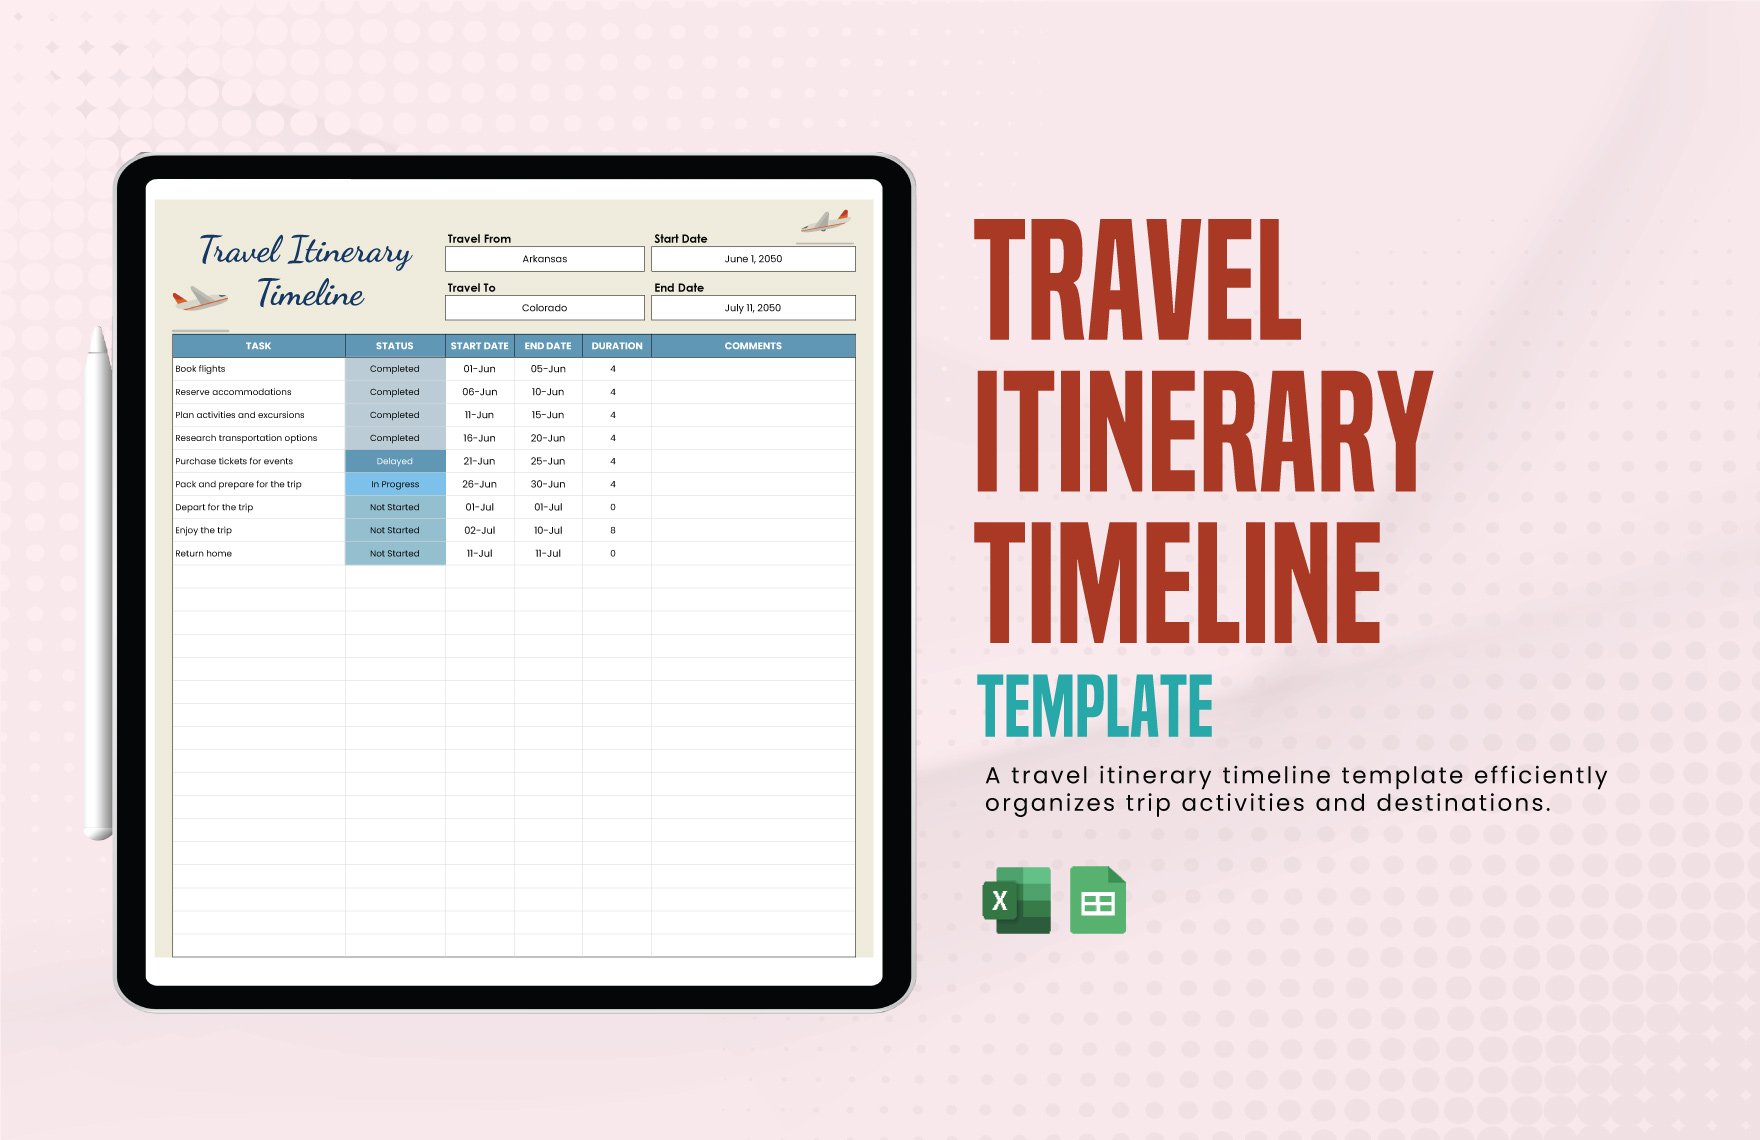 Travel Itinerary Timeline Template in Excel, Google Sheets